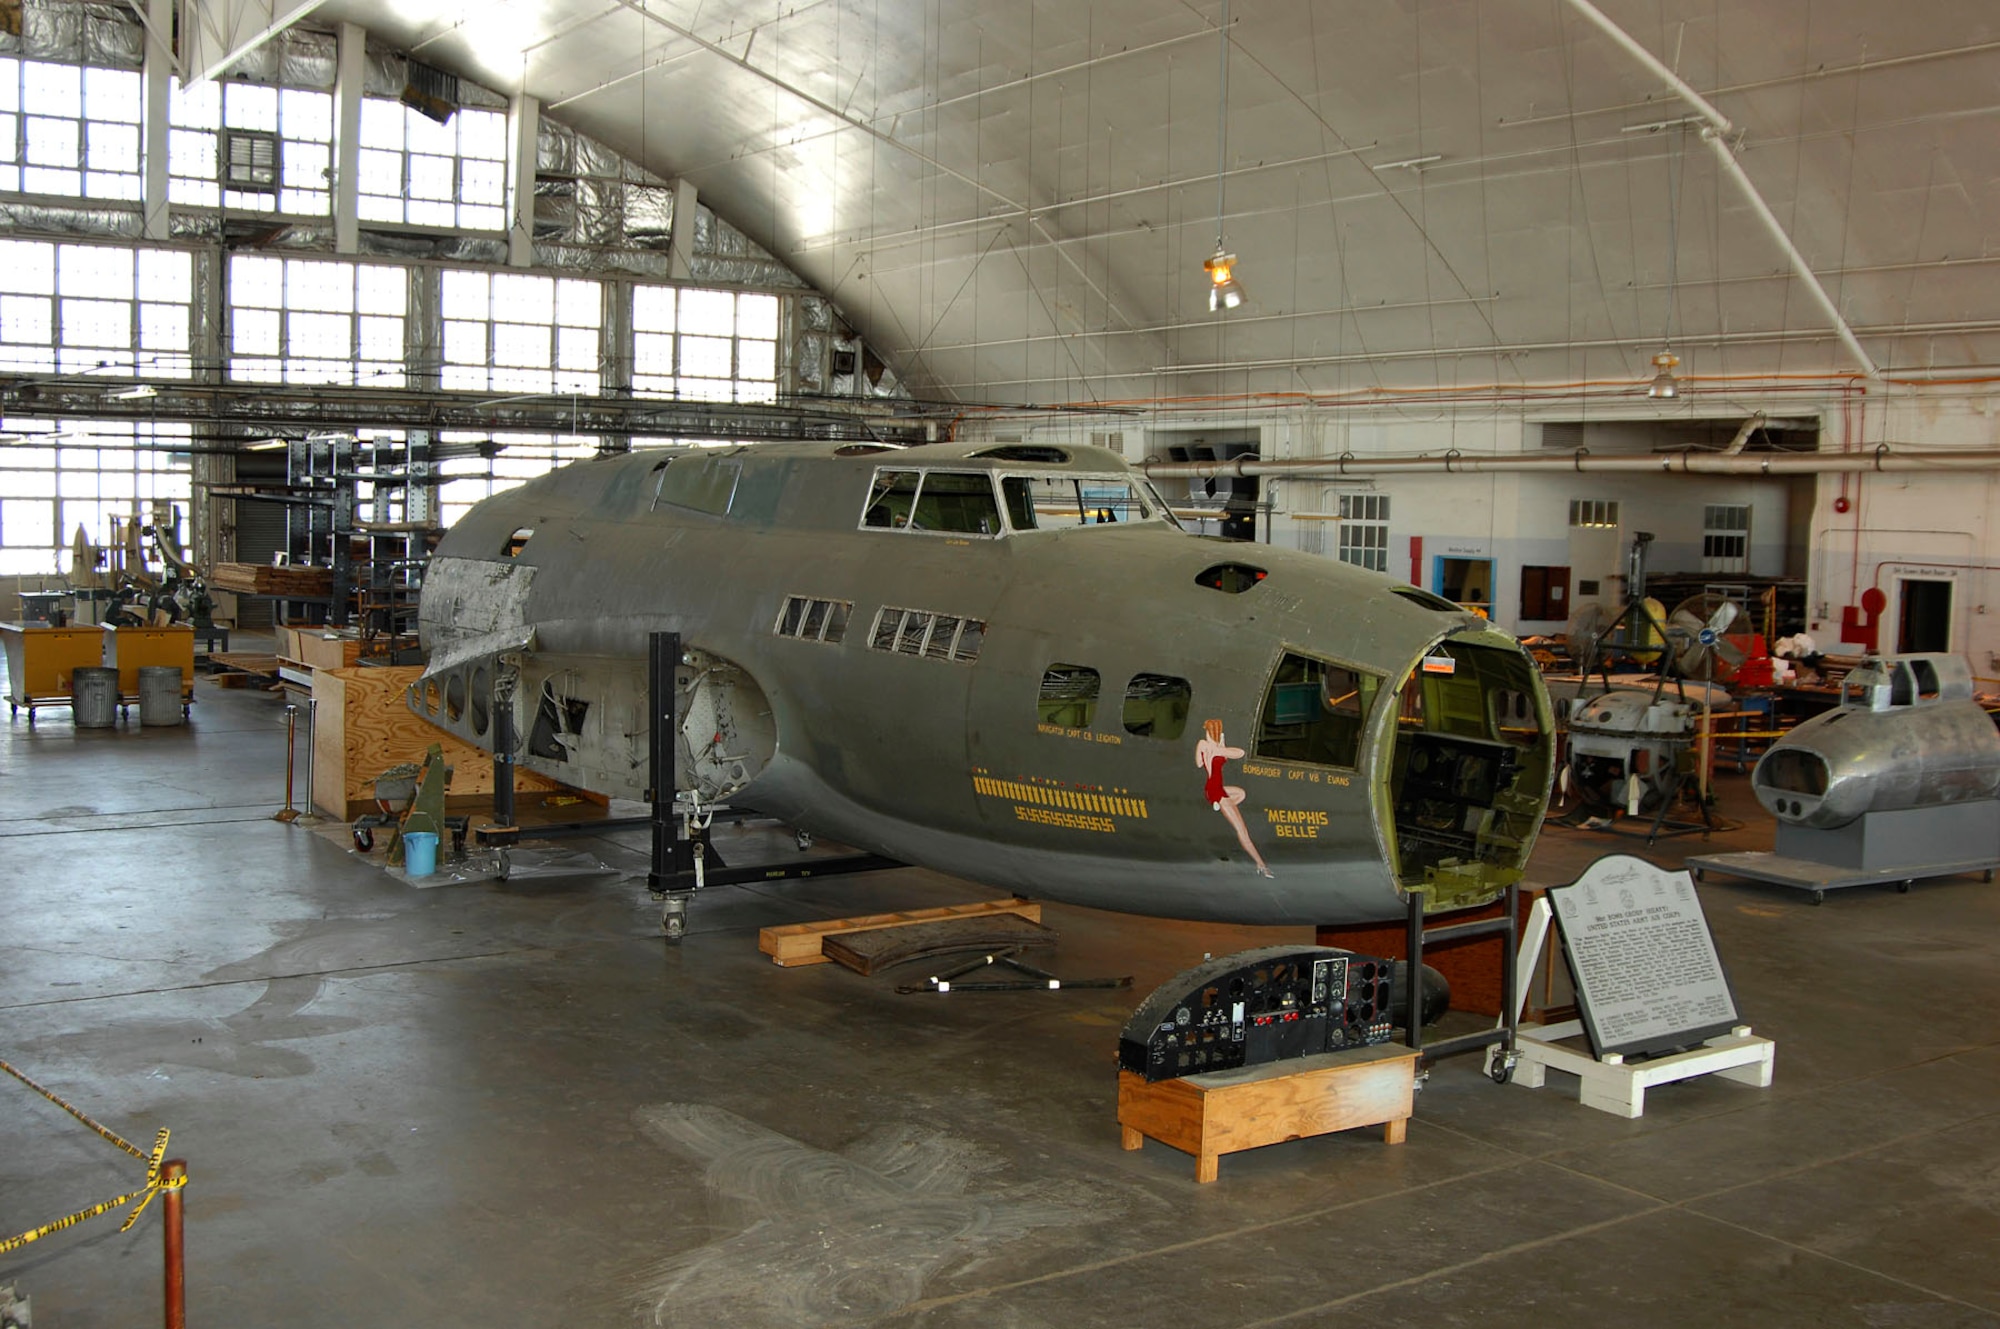 DAYTON, Ohio (02/2007) - The B-17F "Memphis Belle" in restoration at the National Museum of the U.S. Air Force. (U.S. Air Force photo by Ben Strasser)